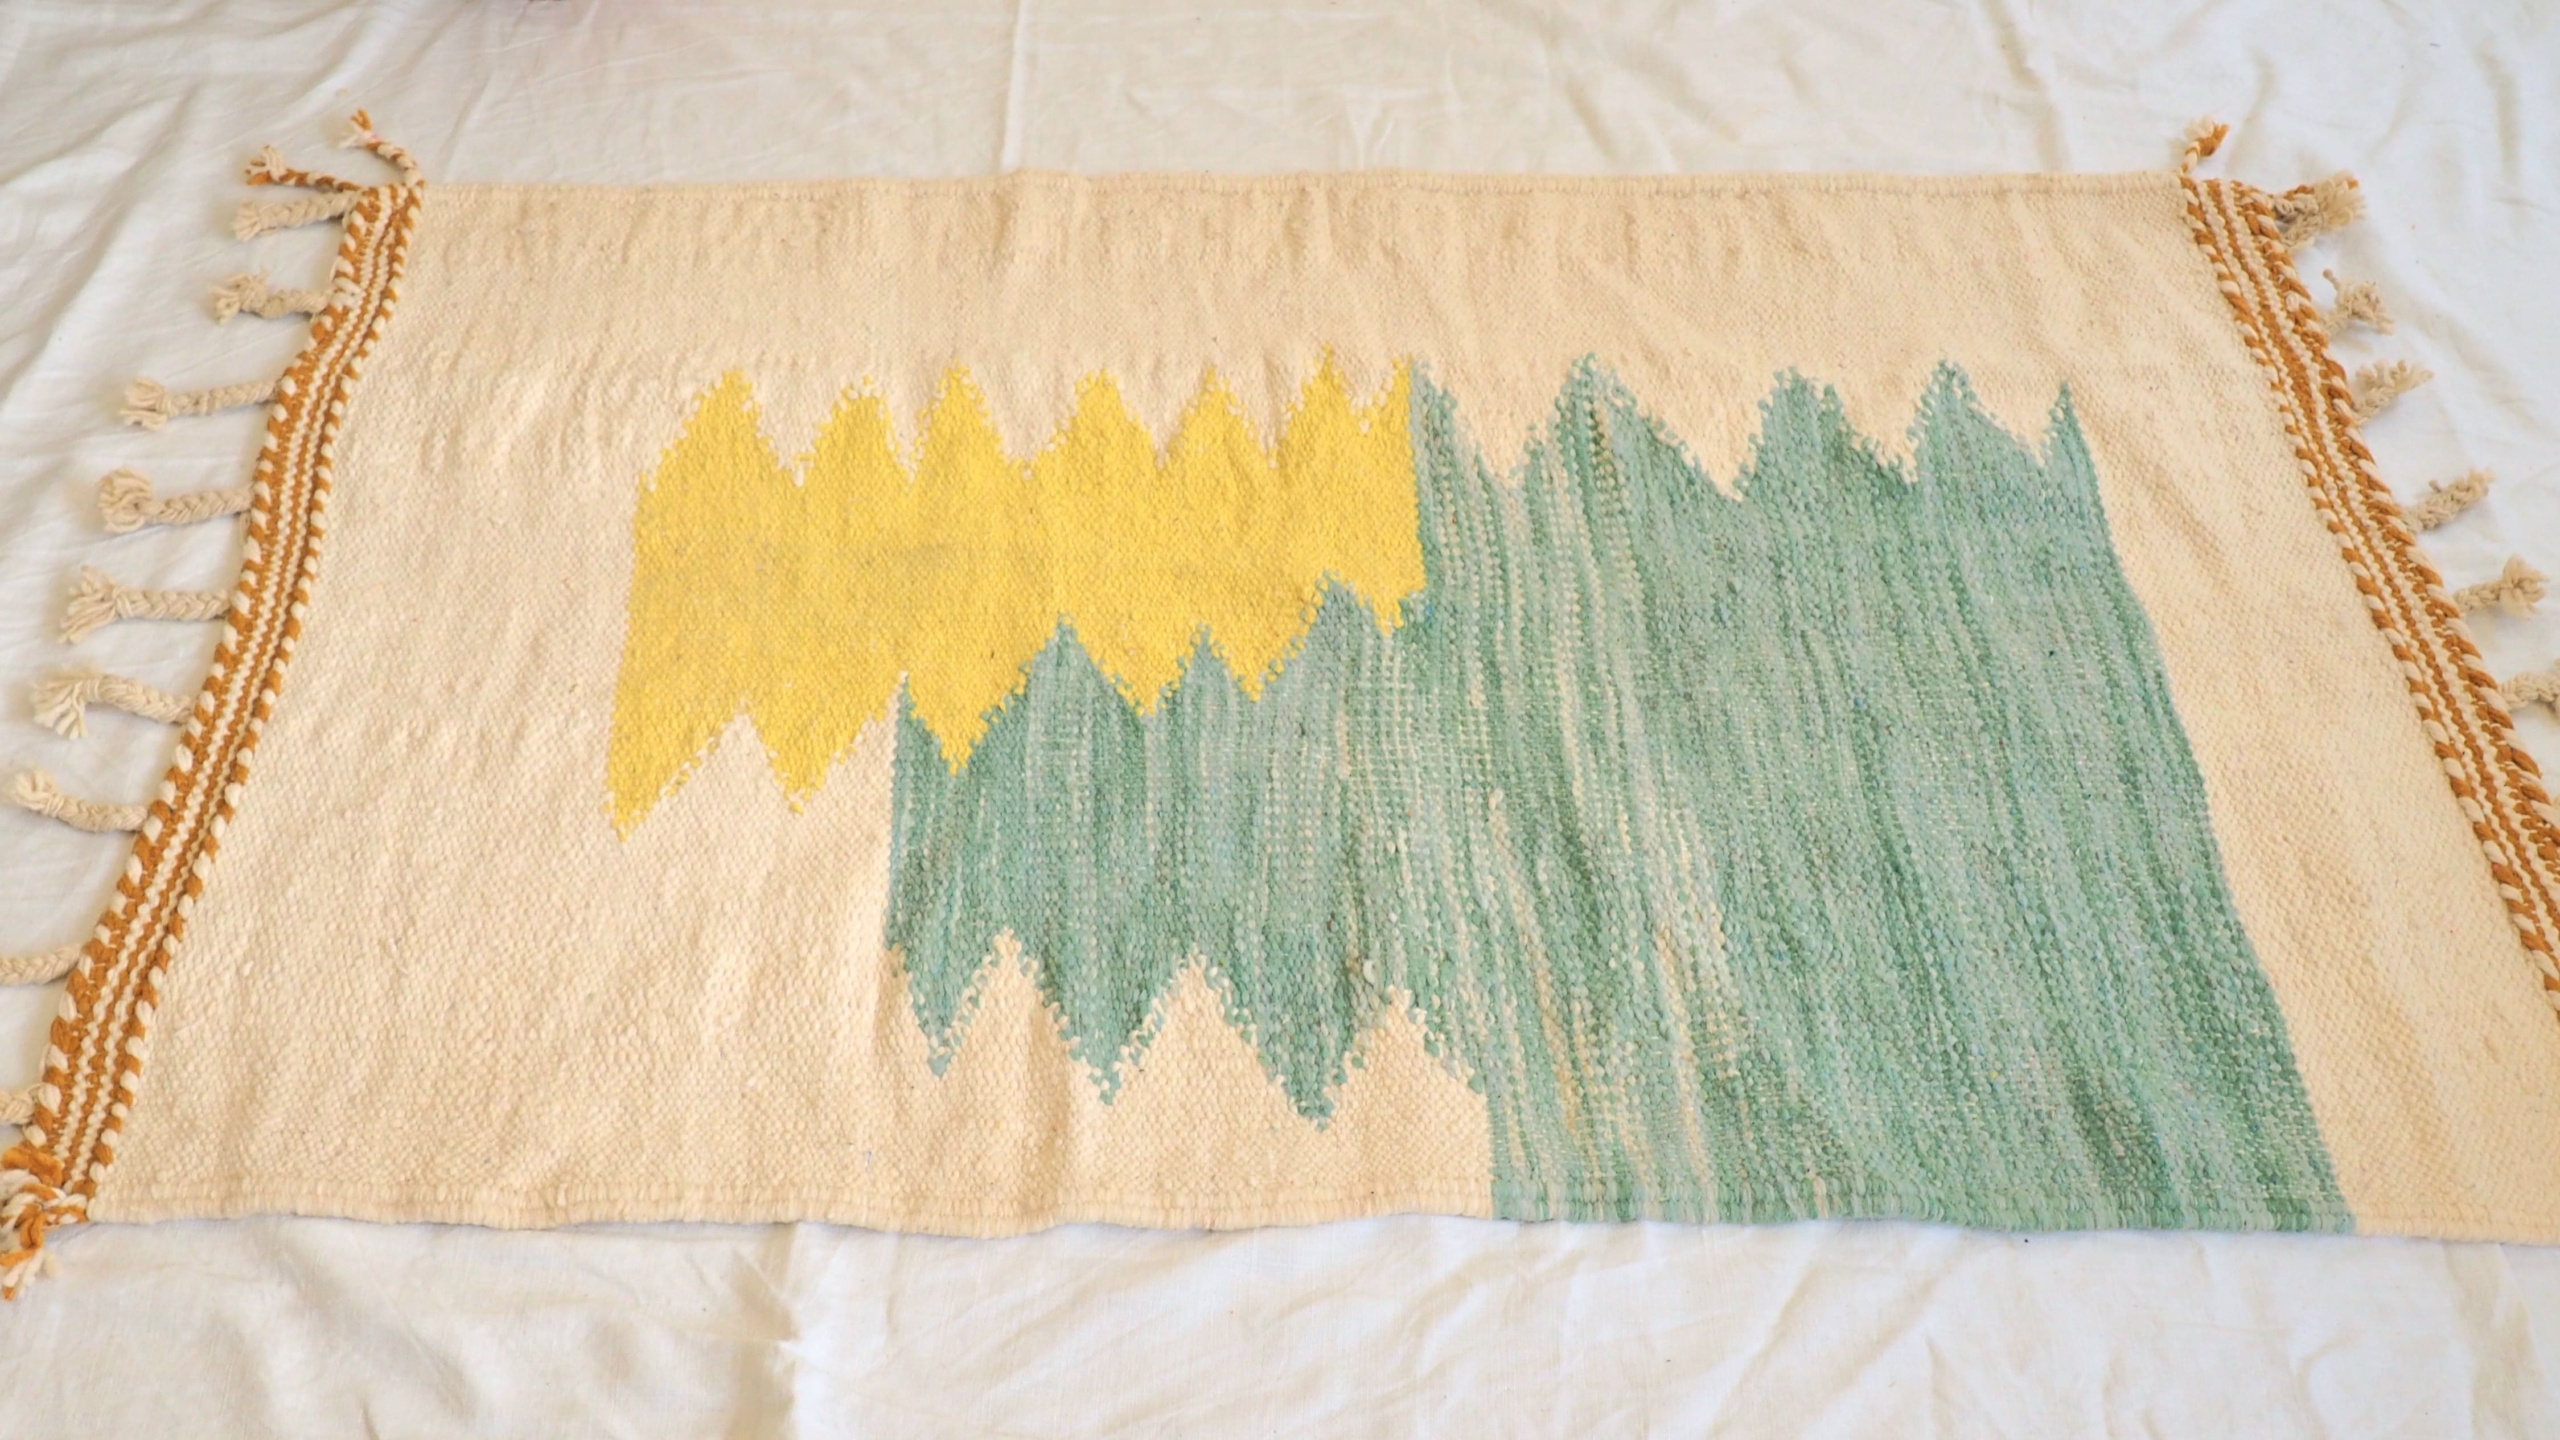 Authentic Berber Moroccan yellow and green kilim wool carpet